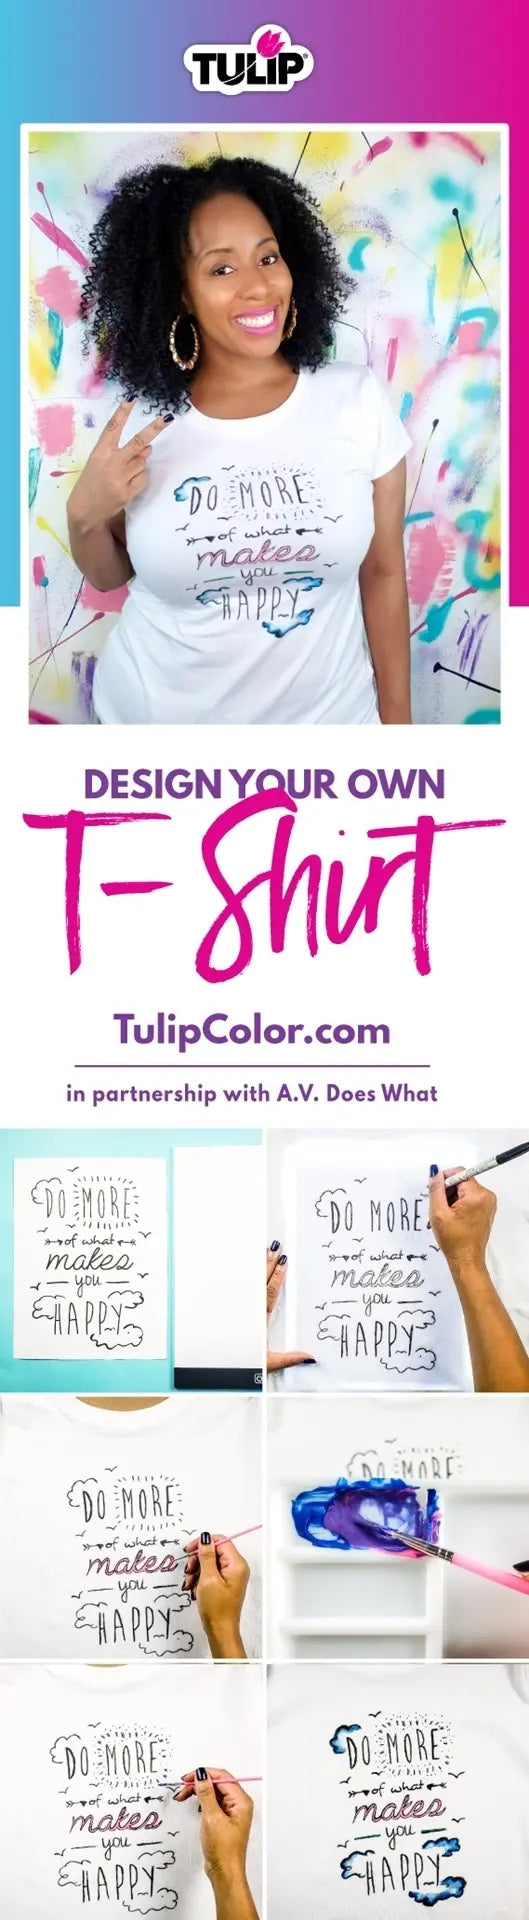 The Easiest Way to Design Your Own T-shirt